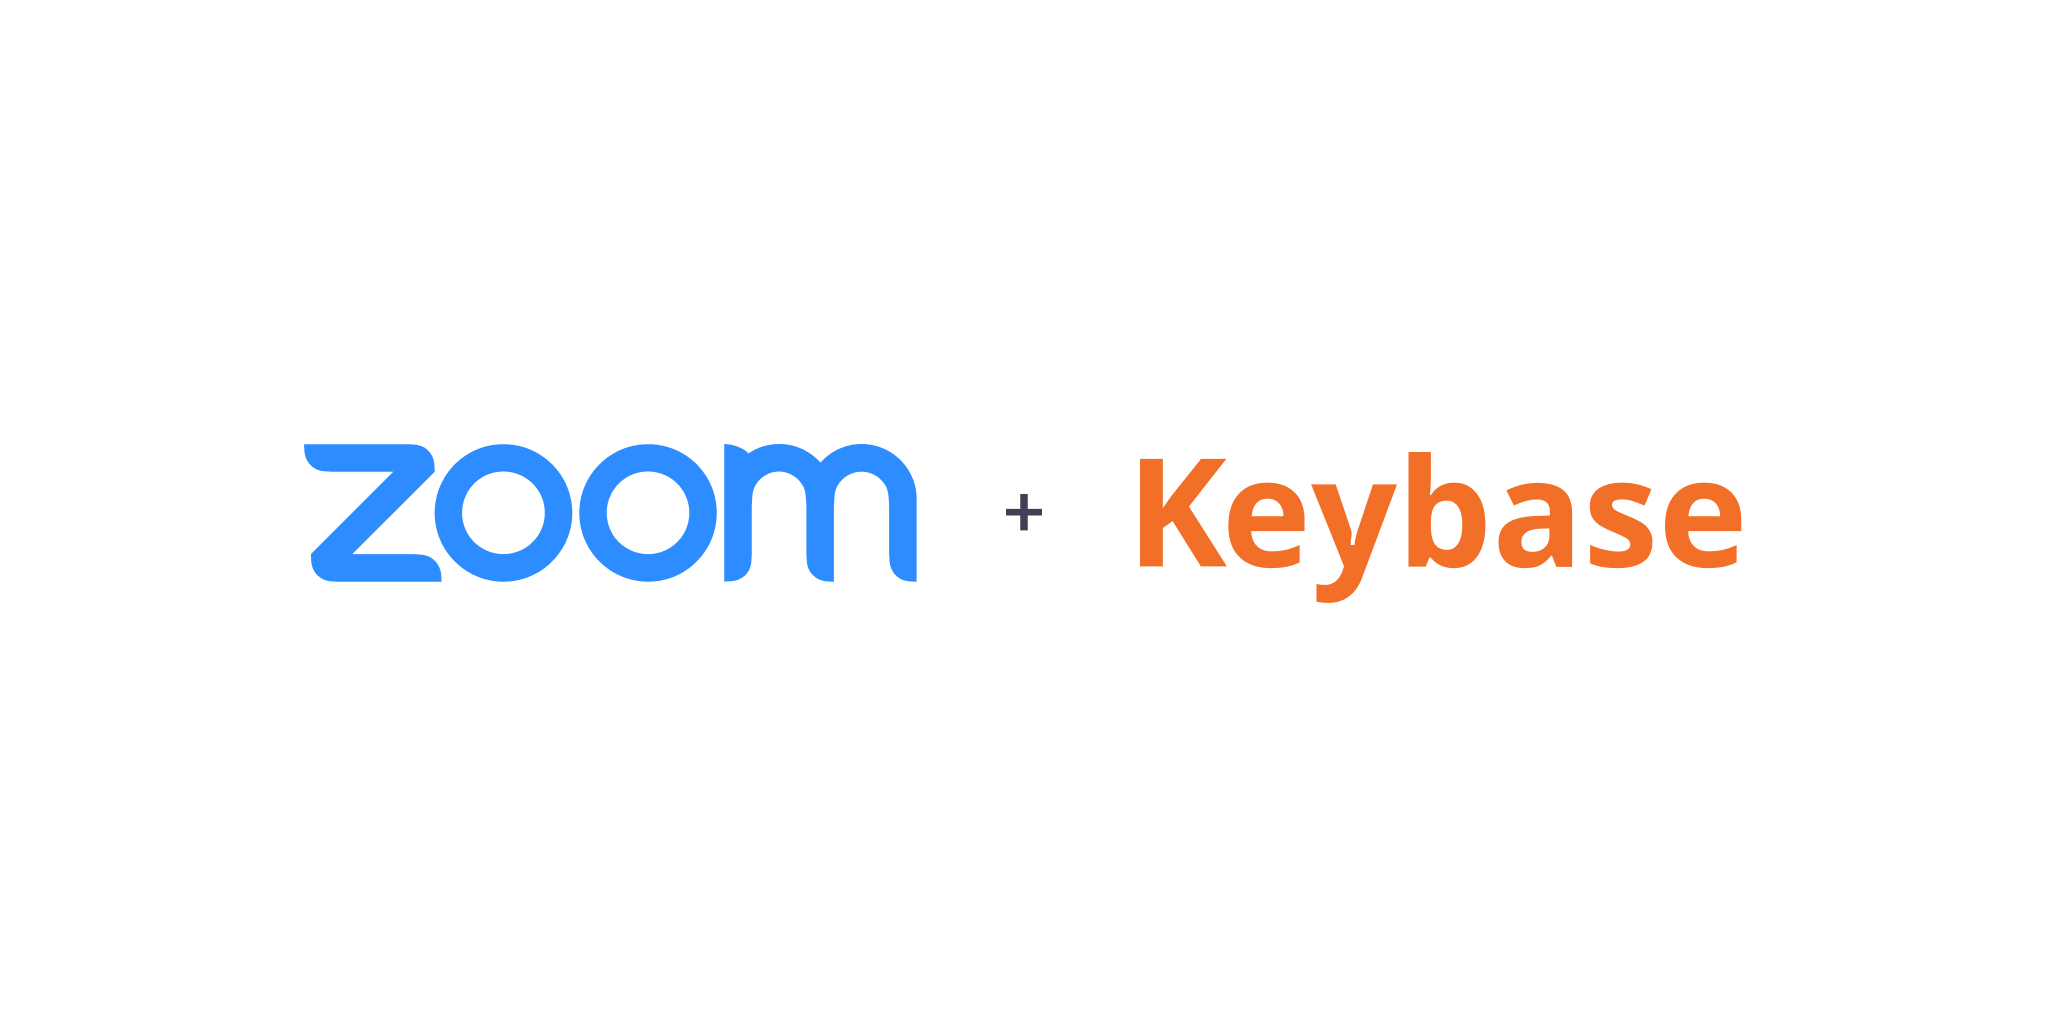 Zoom acquires Keybase